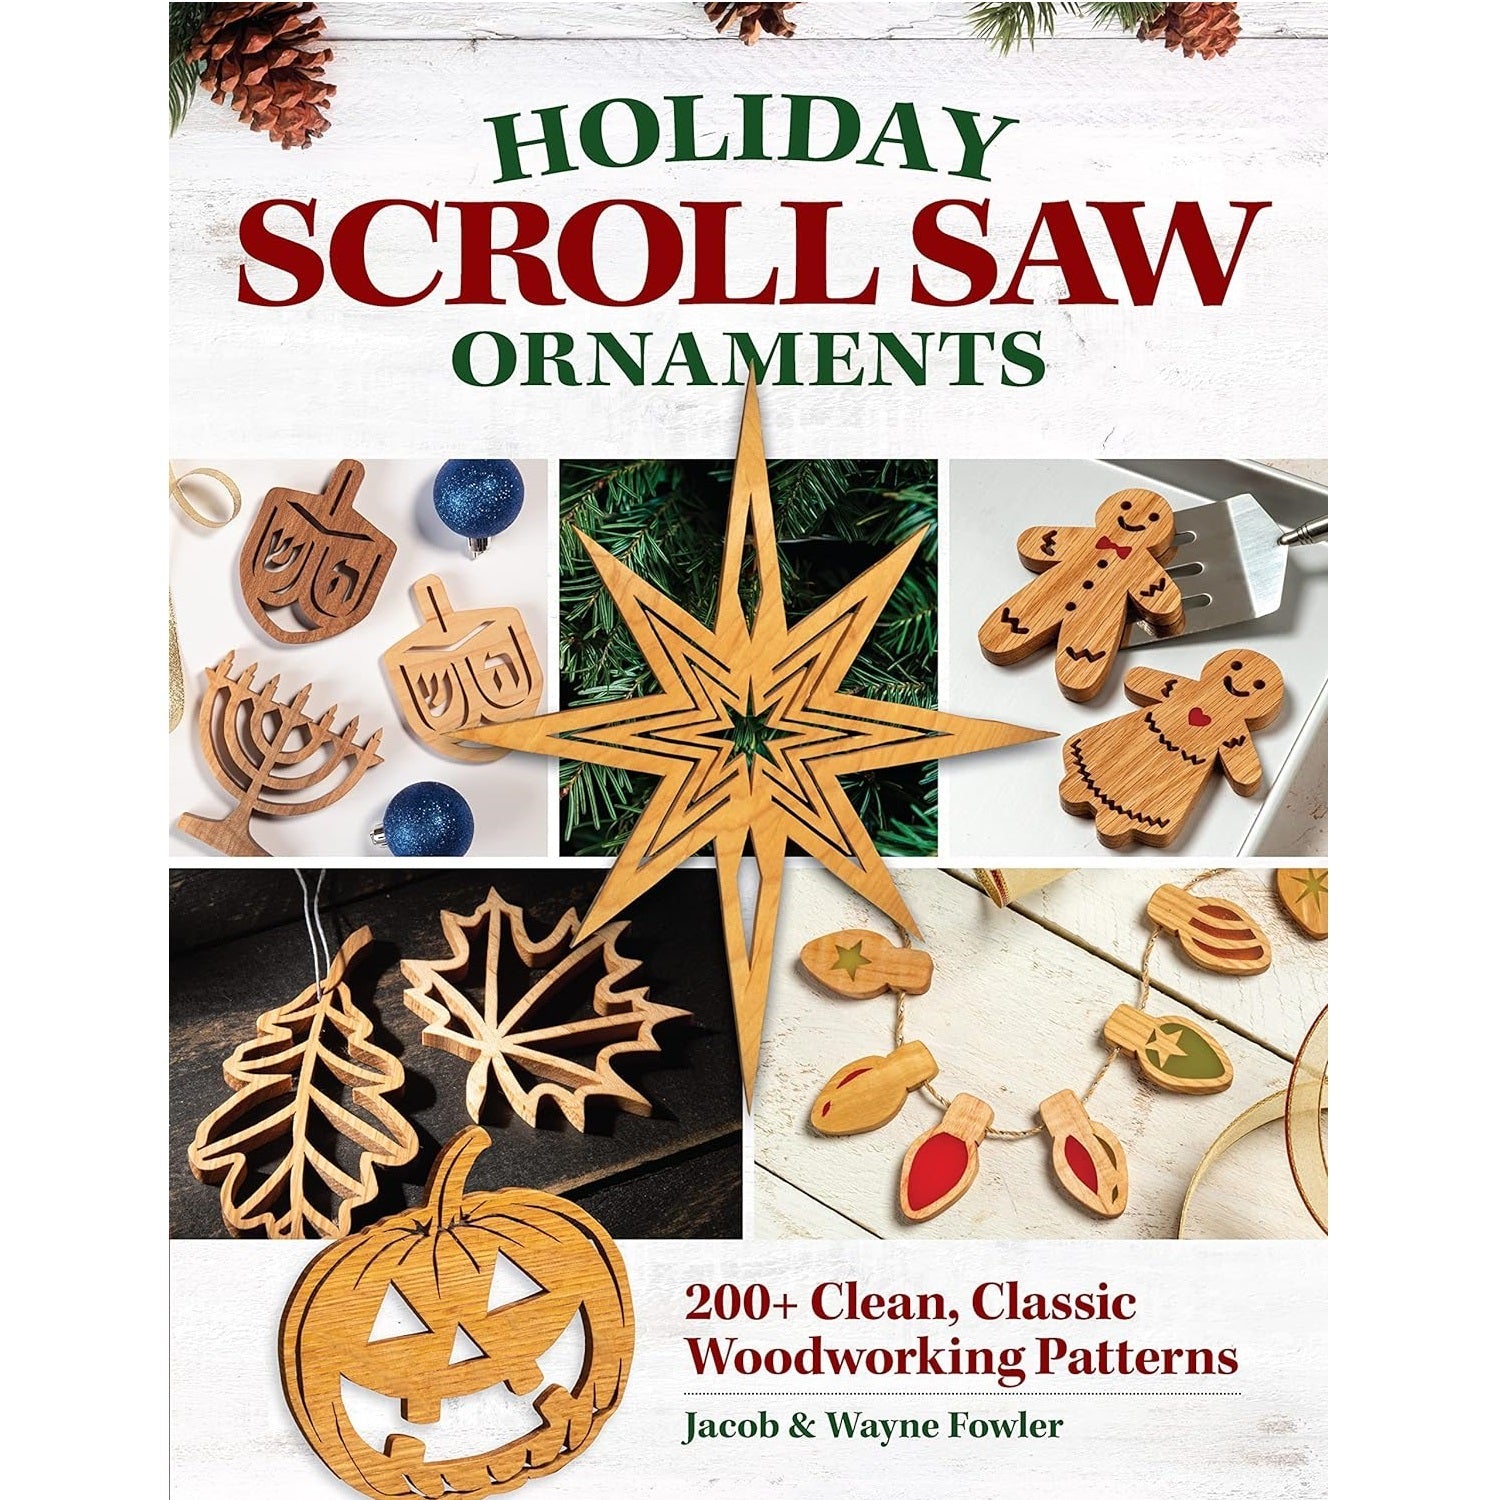 Holiday Scroll Saw Ornaments Book by Jacob & Wayne Fowler